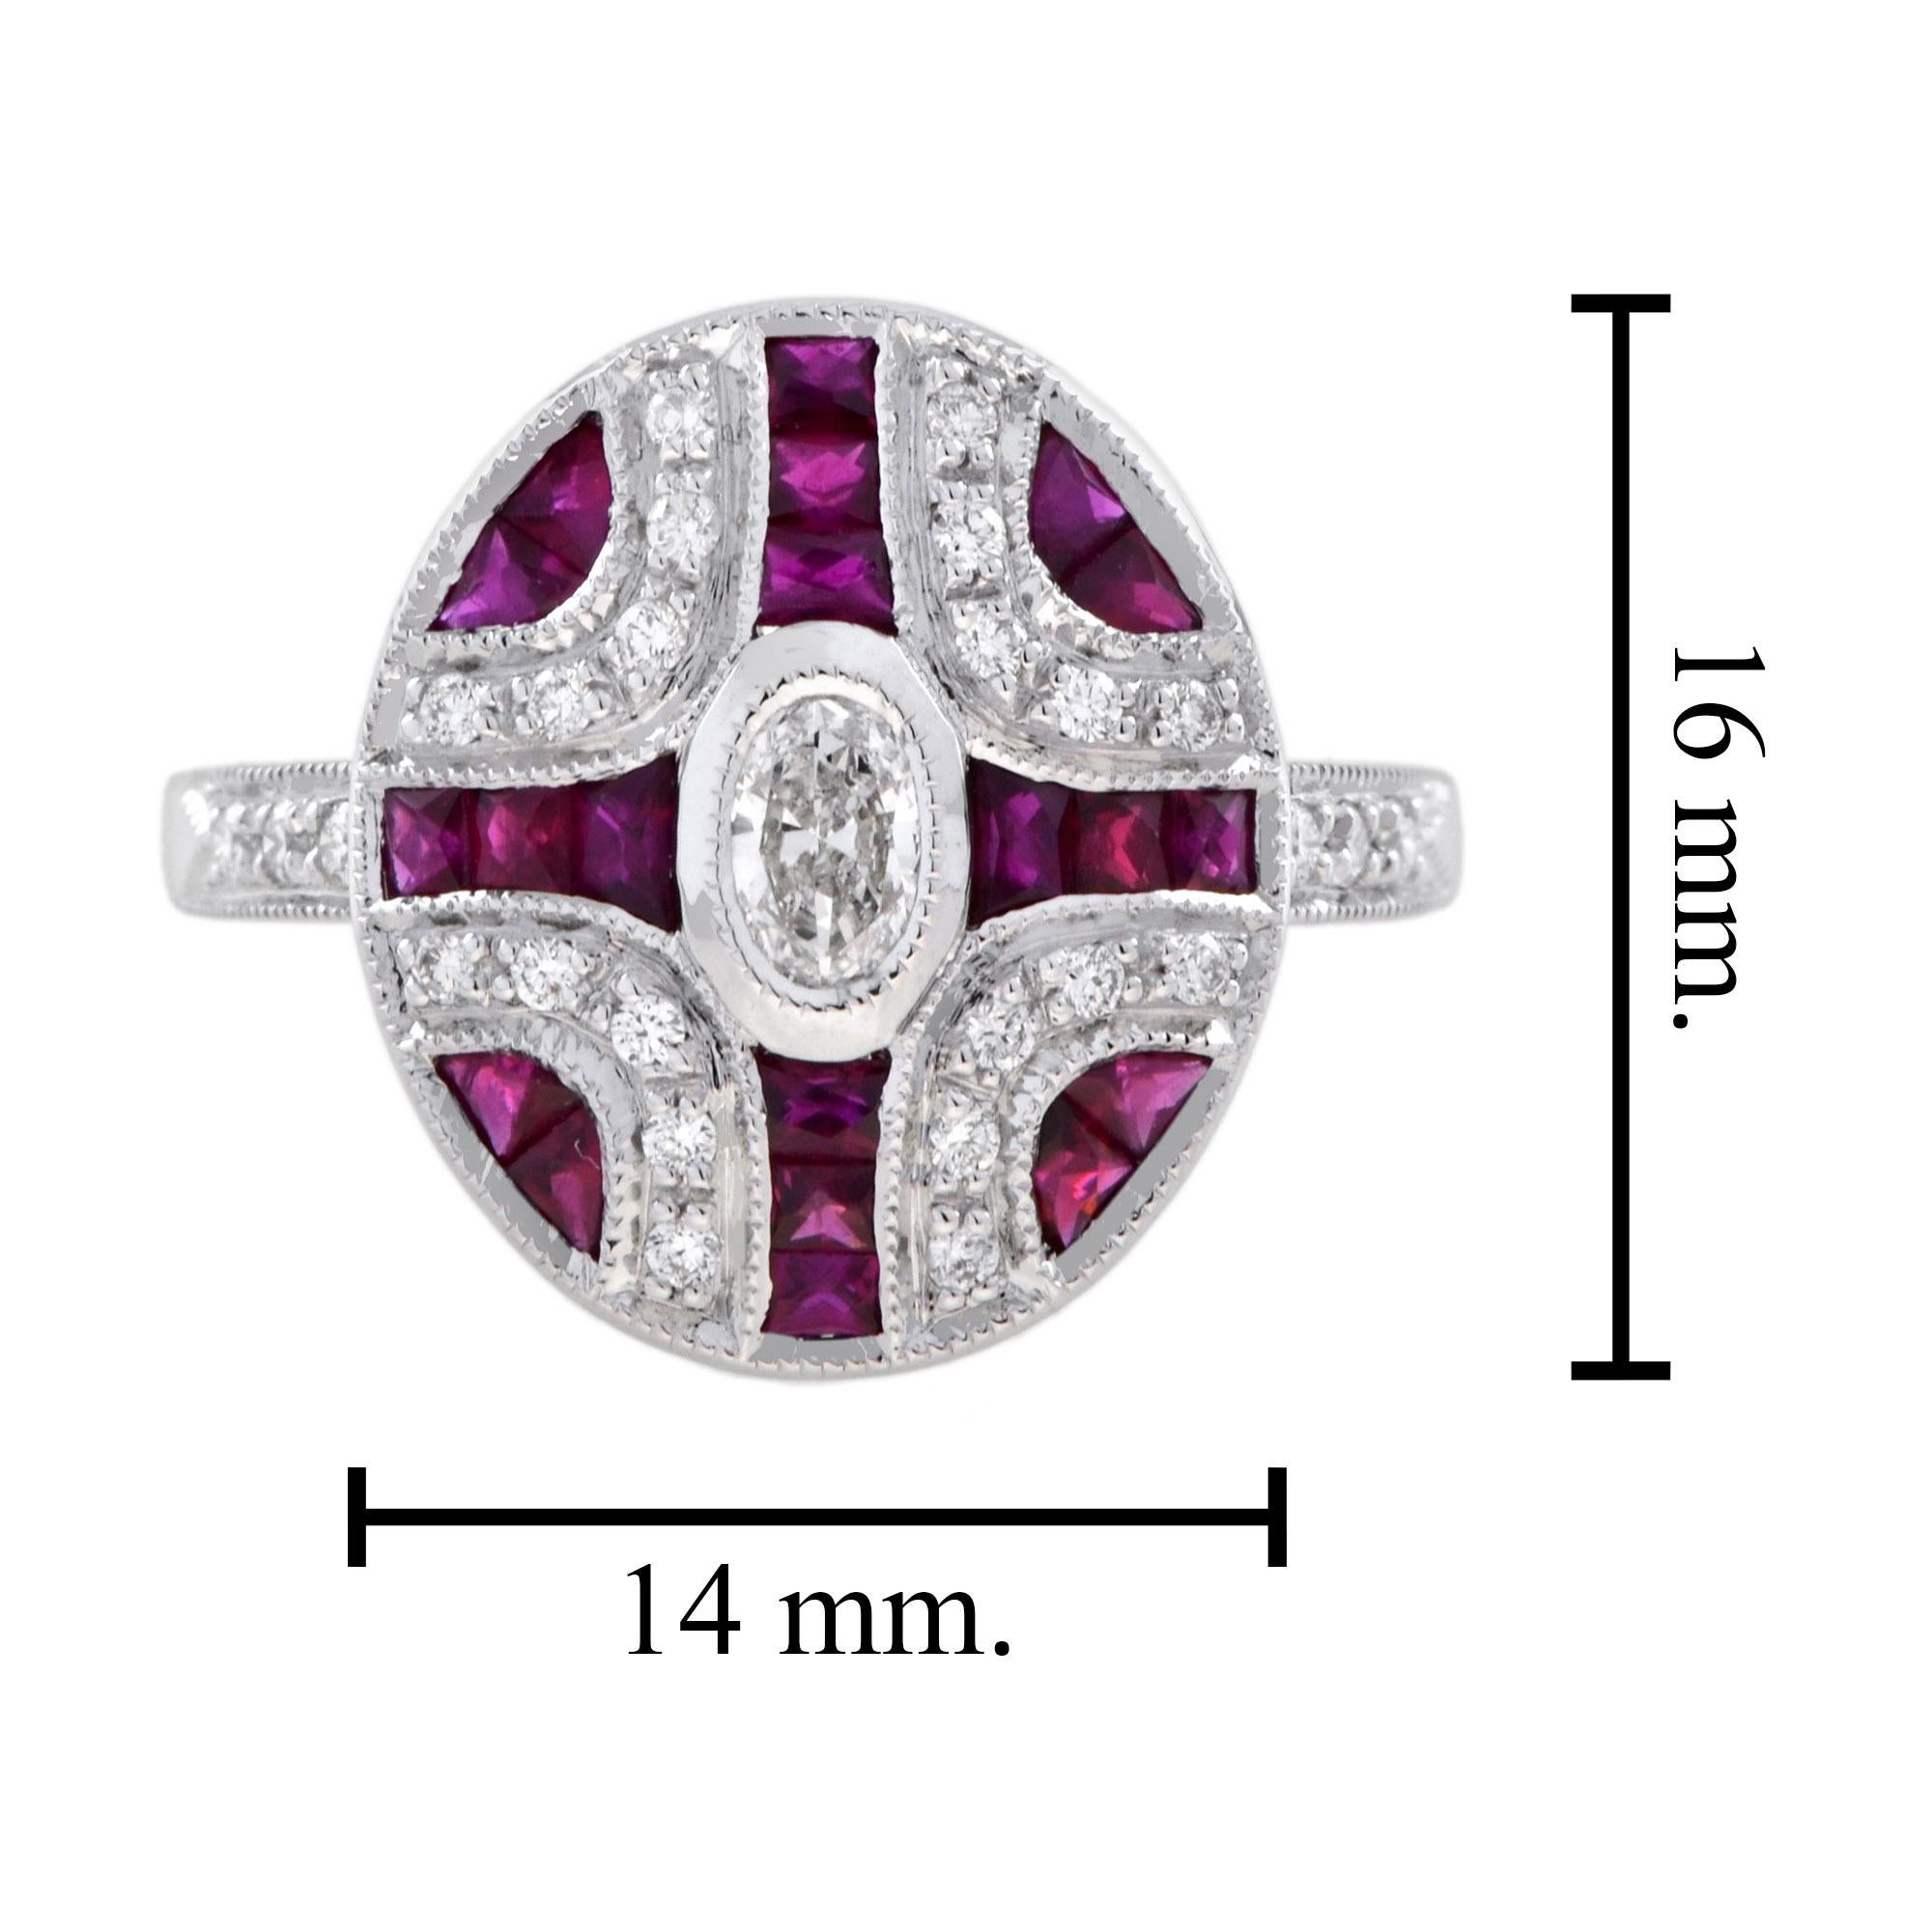 Diamond and Ruby Art Deco Style Engagement Ring in 14K White Gold For Sale 2